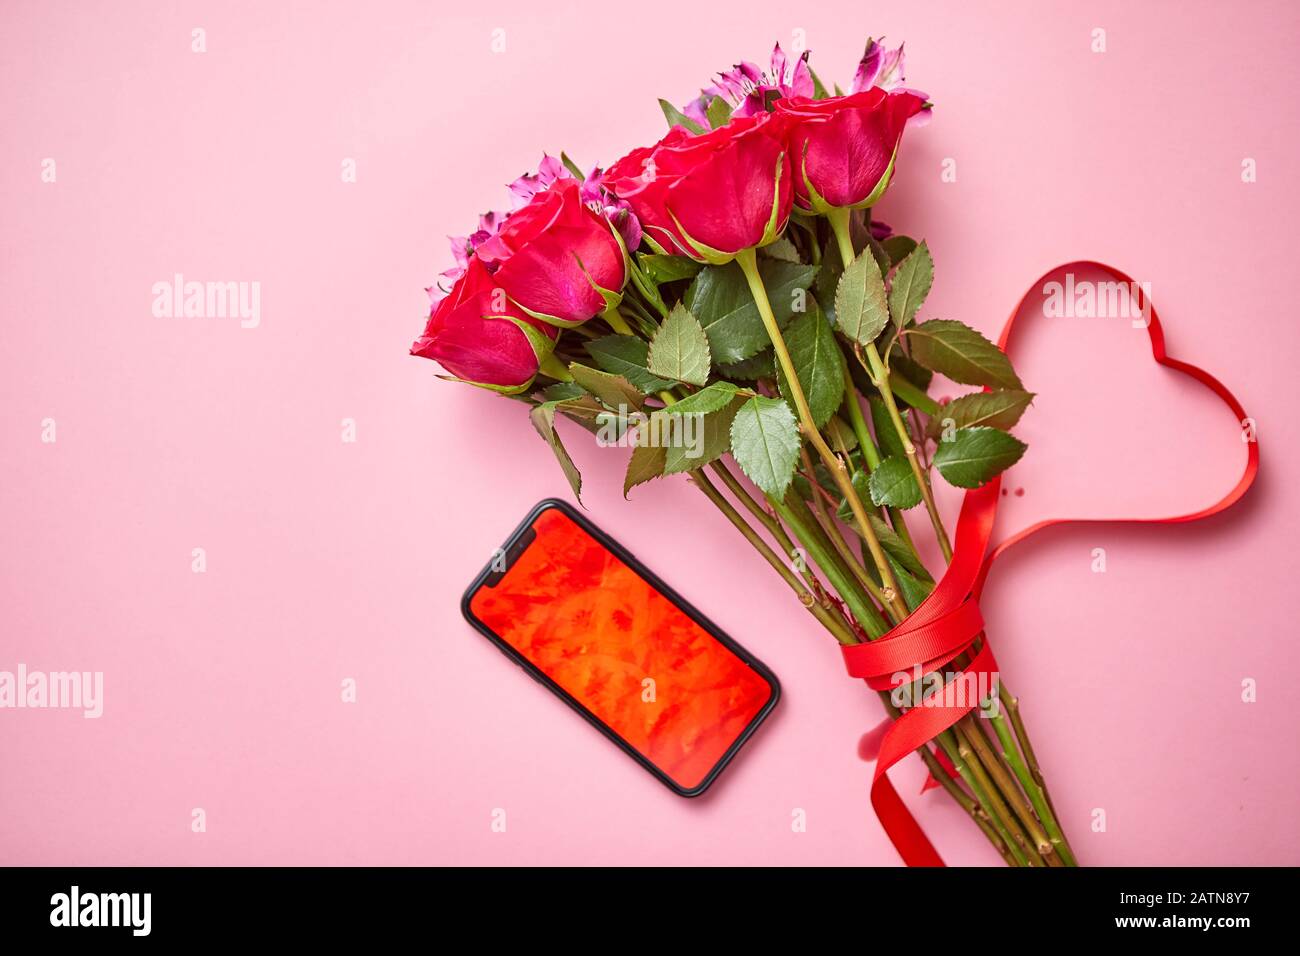 Heart Shaped Bouquet Of Beautiful Rose Flowers In The Gift Box Handmade  Pink And Red Bouquet Rose In Love Hart Shape Valentine In Closeup A Box In  The Shape Of A Heart